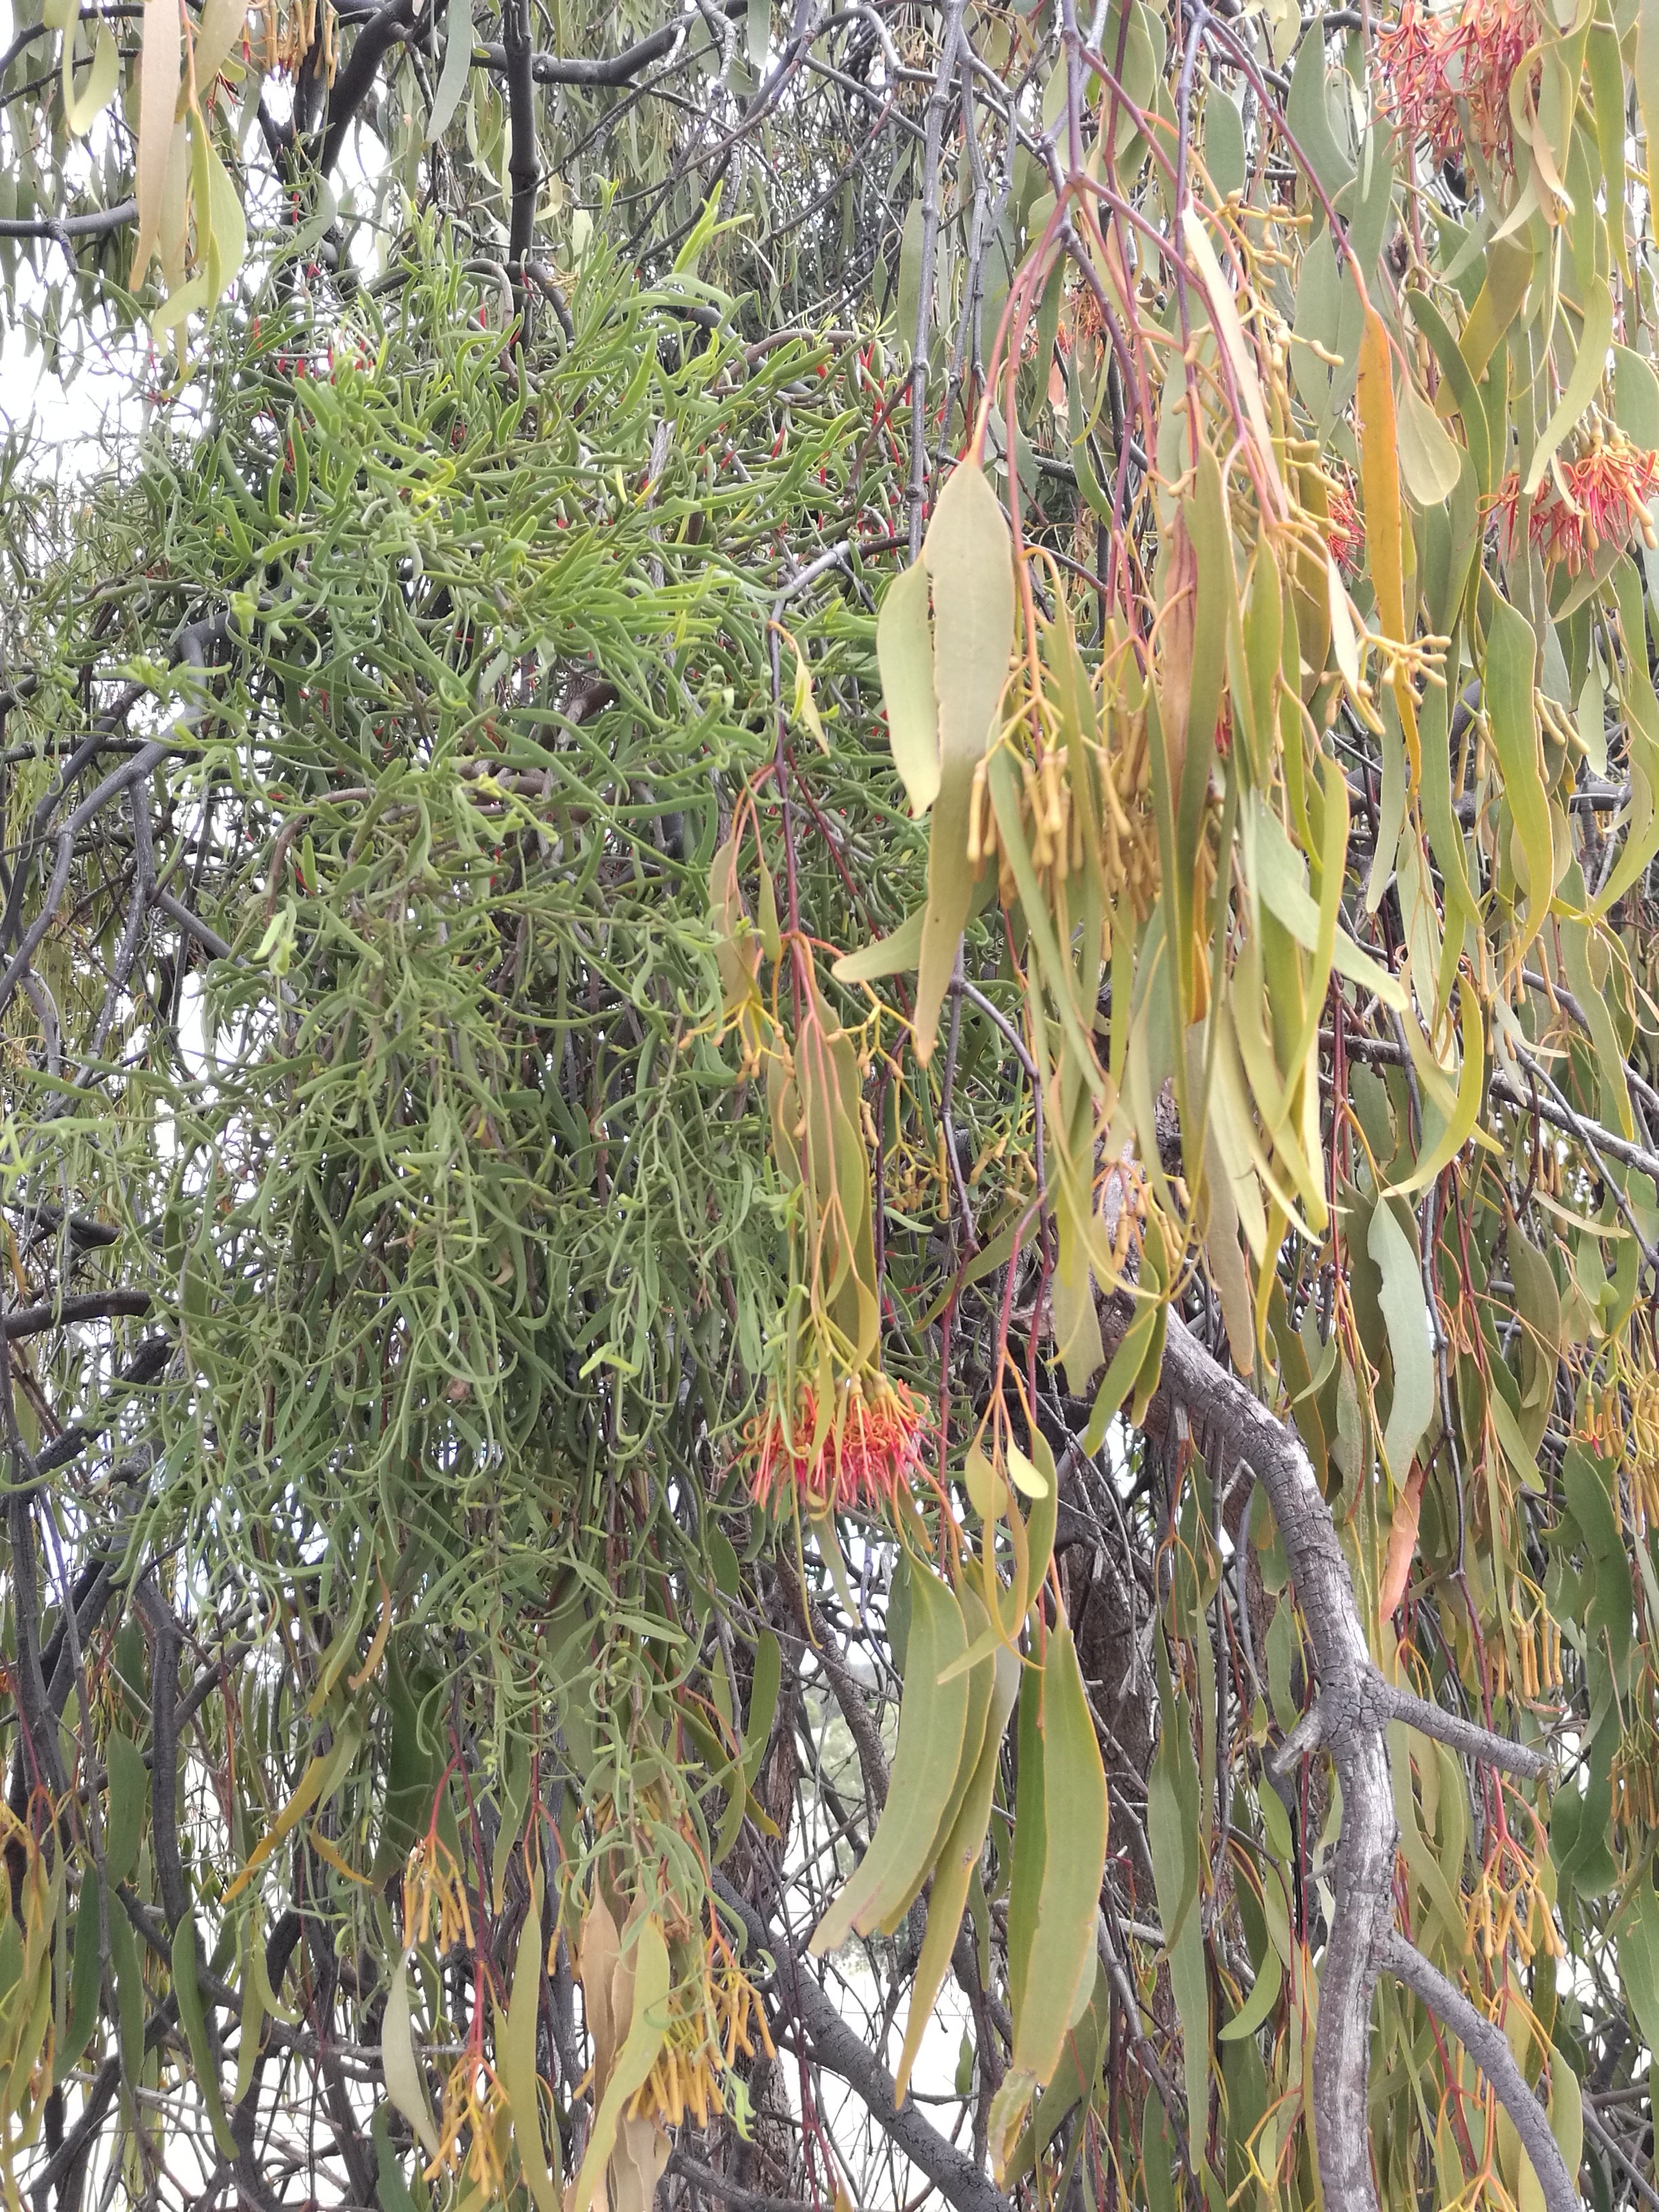 There’s 3 Mistletoes in this mix, all on the one tree.